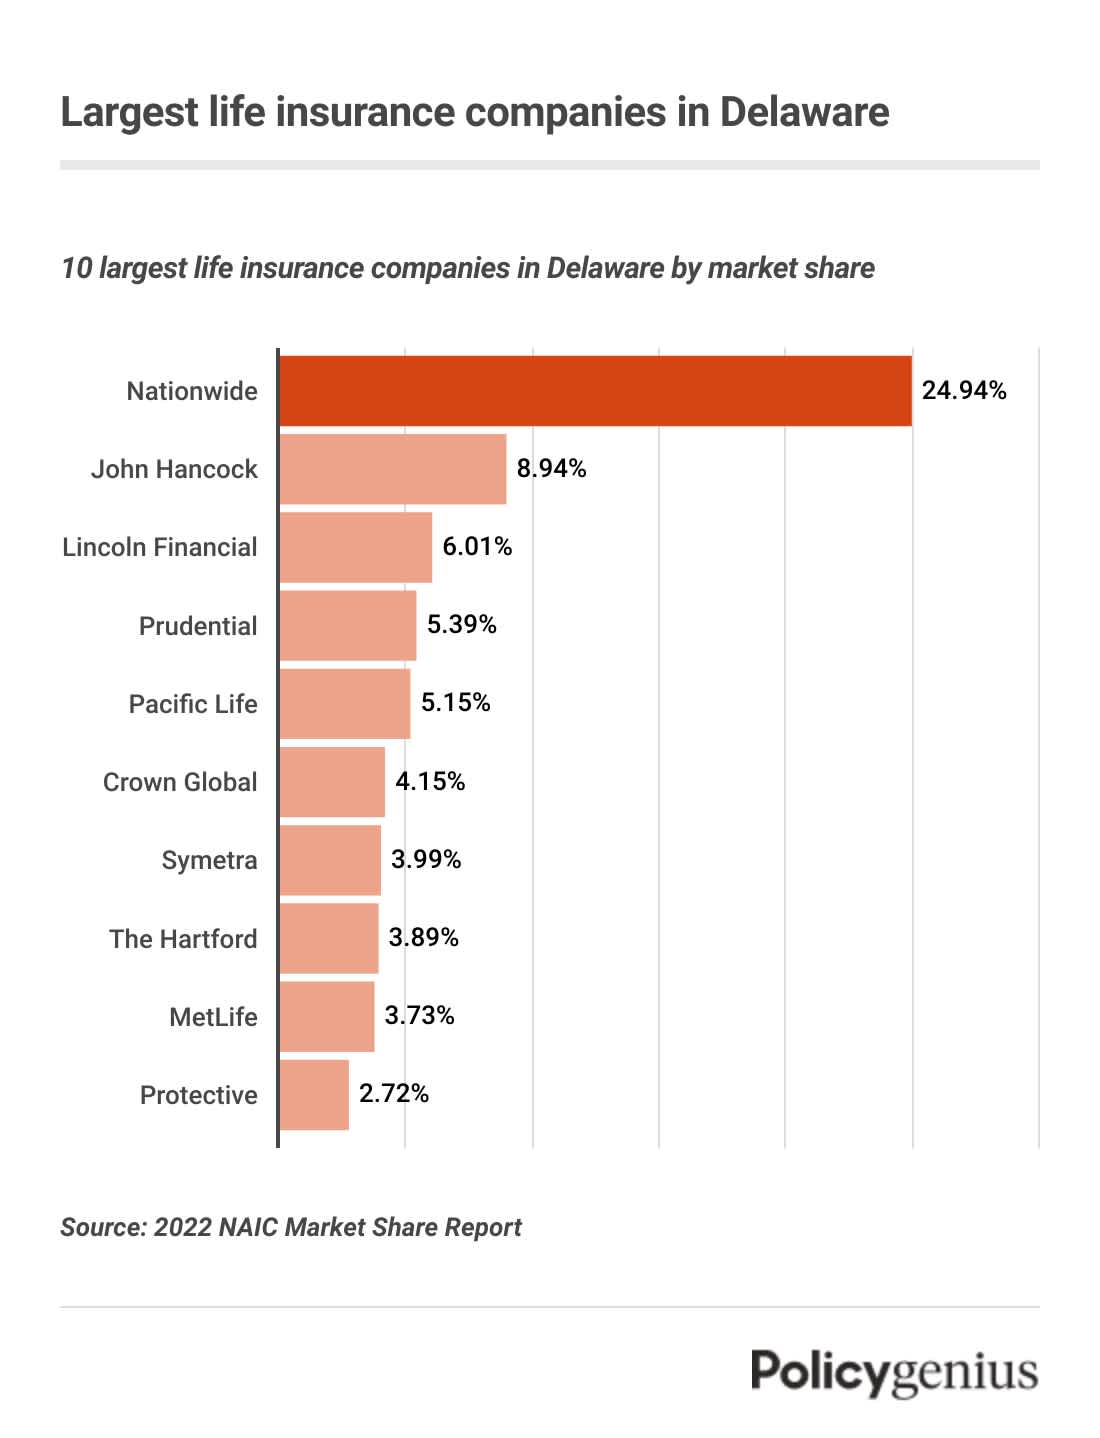 A bar graph showing the largest life insurance companies in Delaware. The company with the largest marketshare is Nationwide.